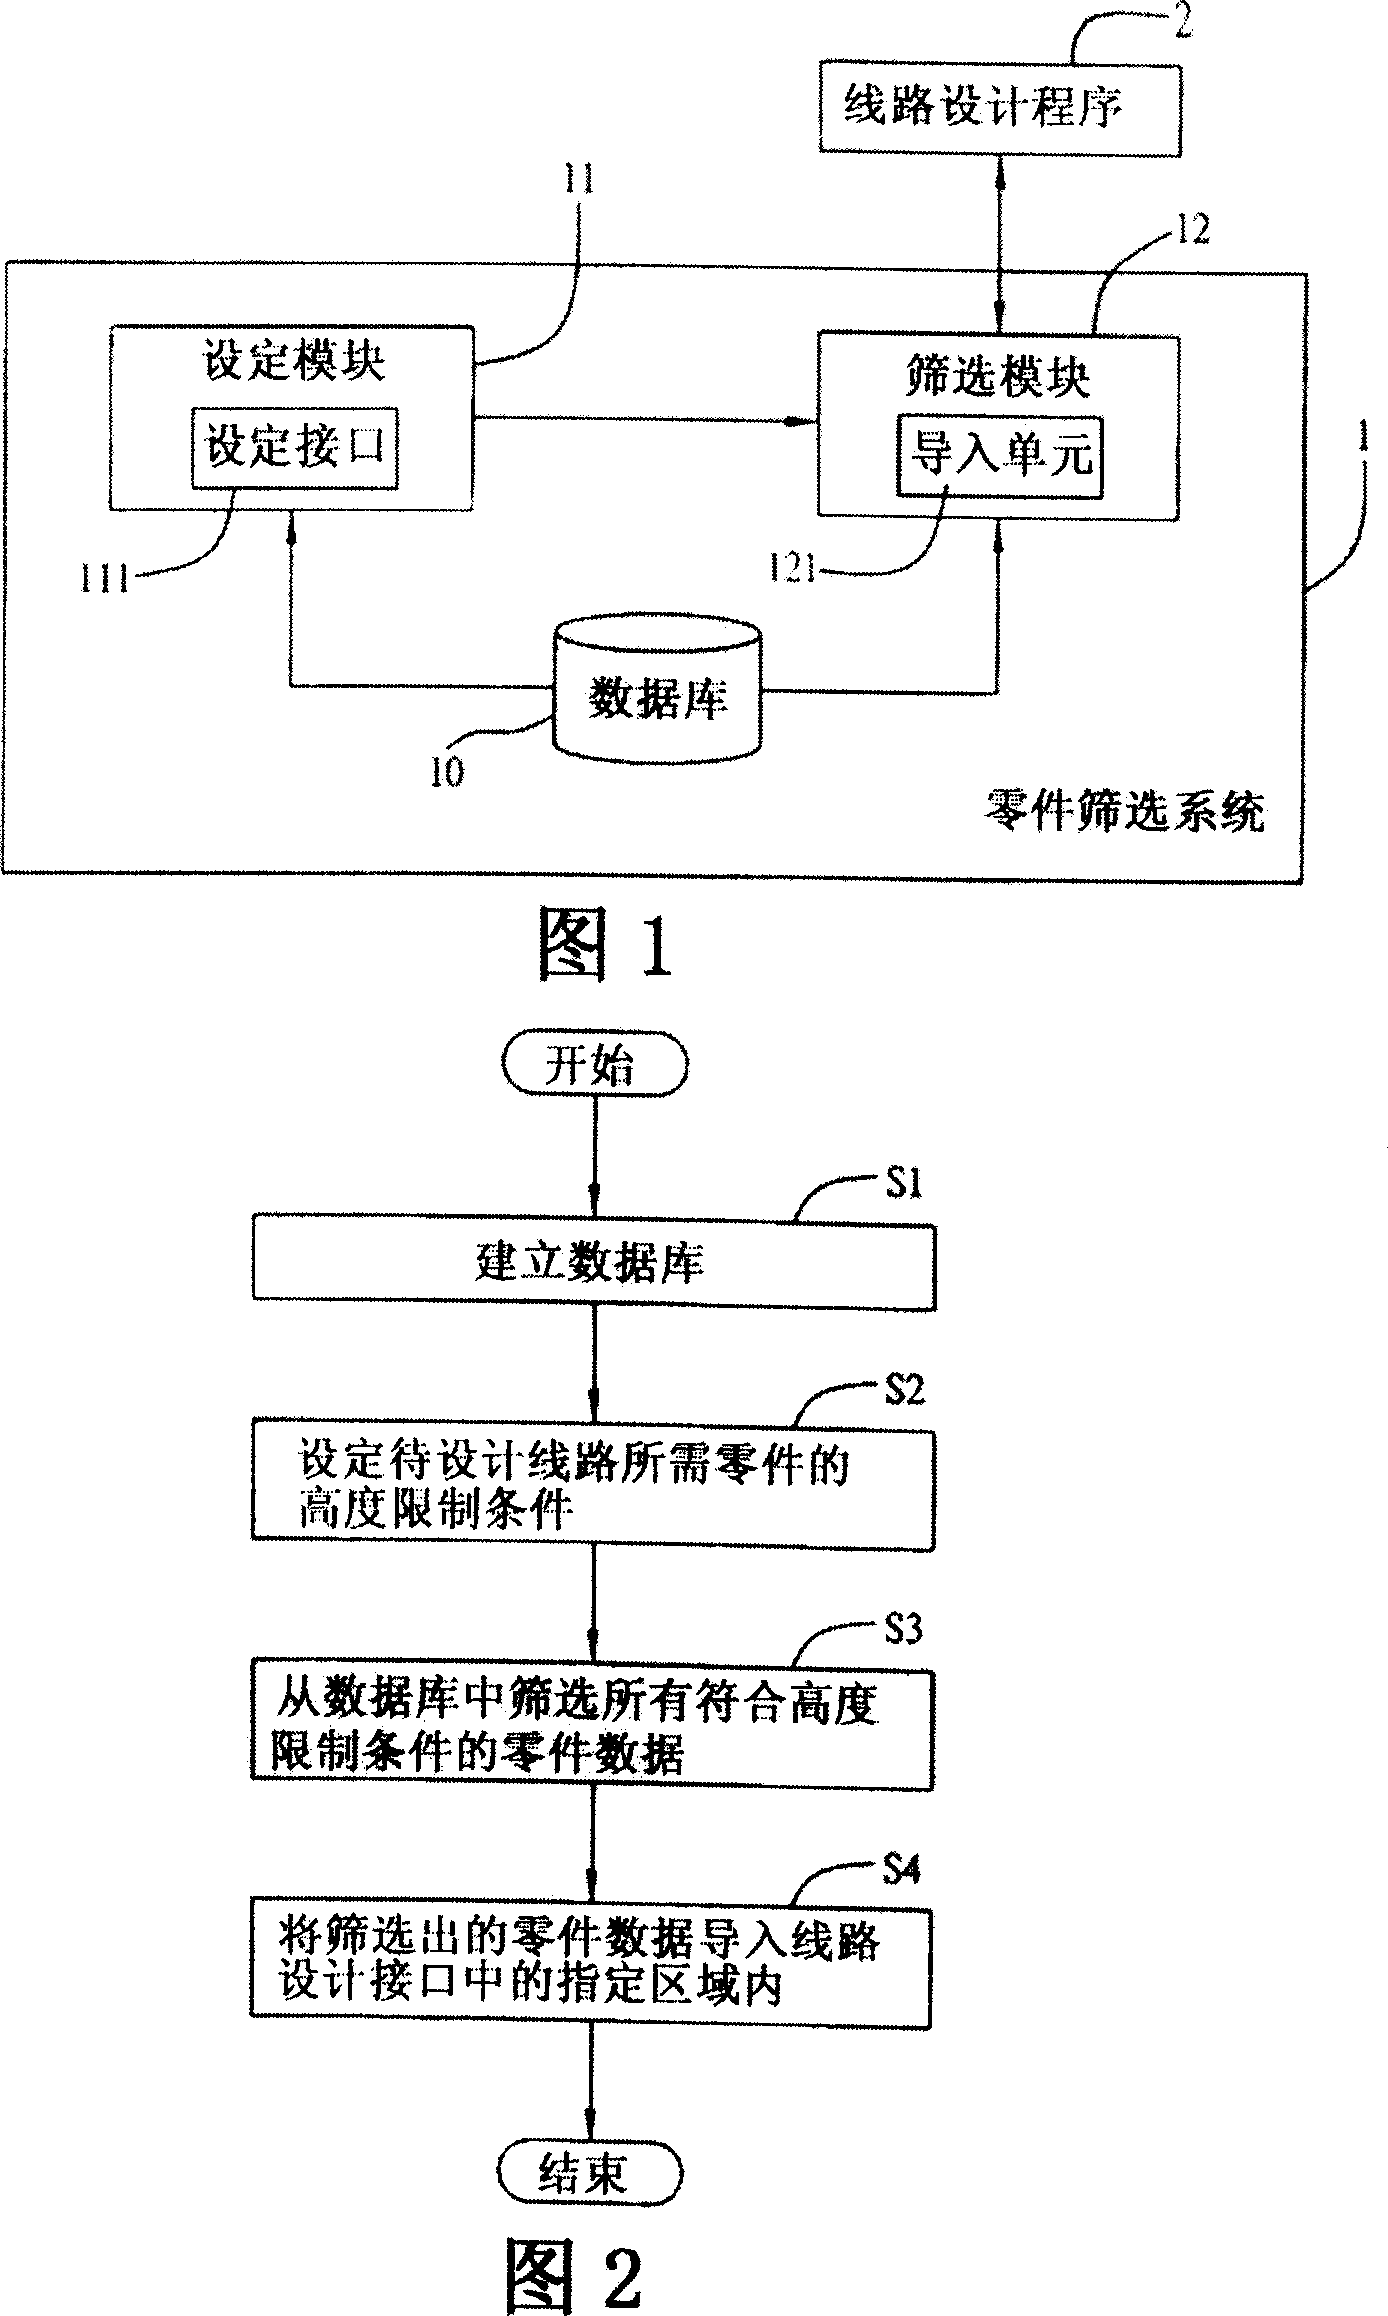 Screening method and system for accessory